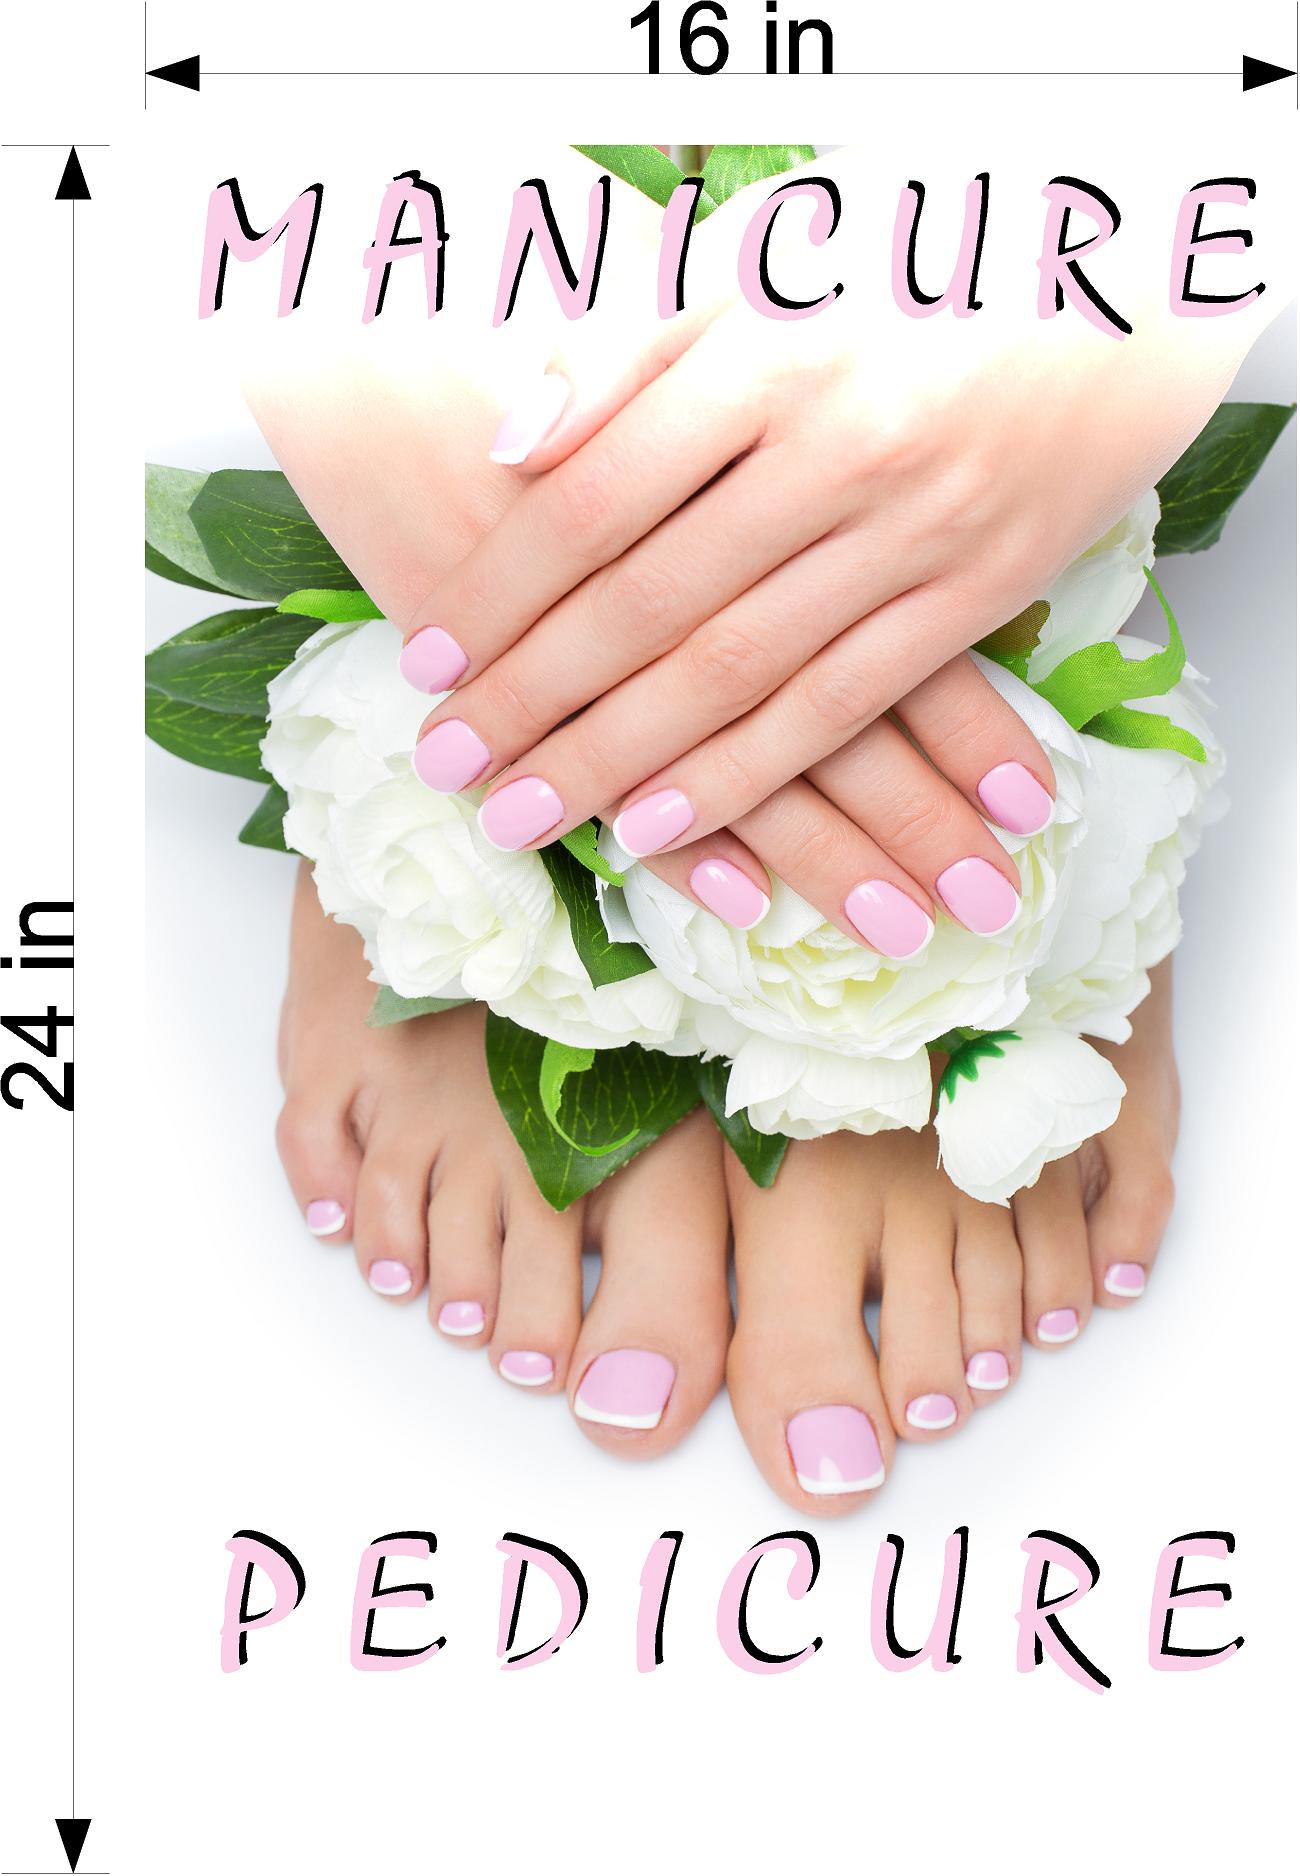 Pedicure & Manicure 11 Wallpaper Poster Decal with Adhesive Backing Wall Sticker Decor Indoors Interior Sign Vertical